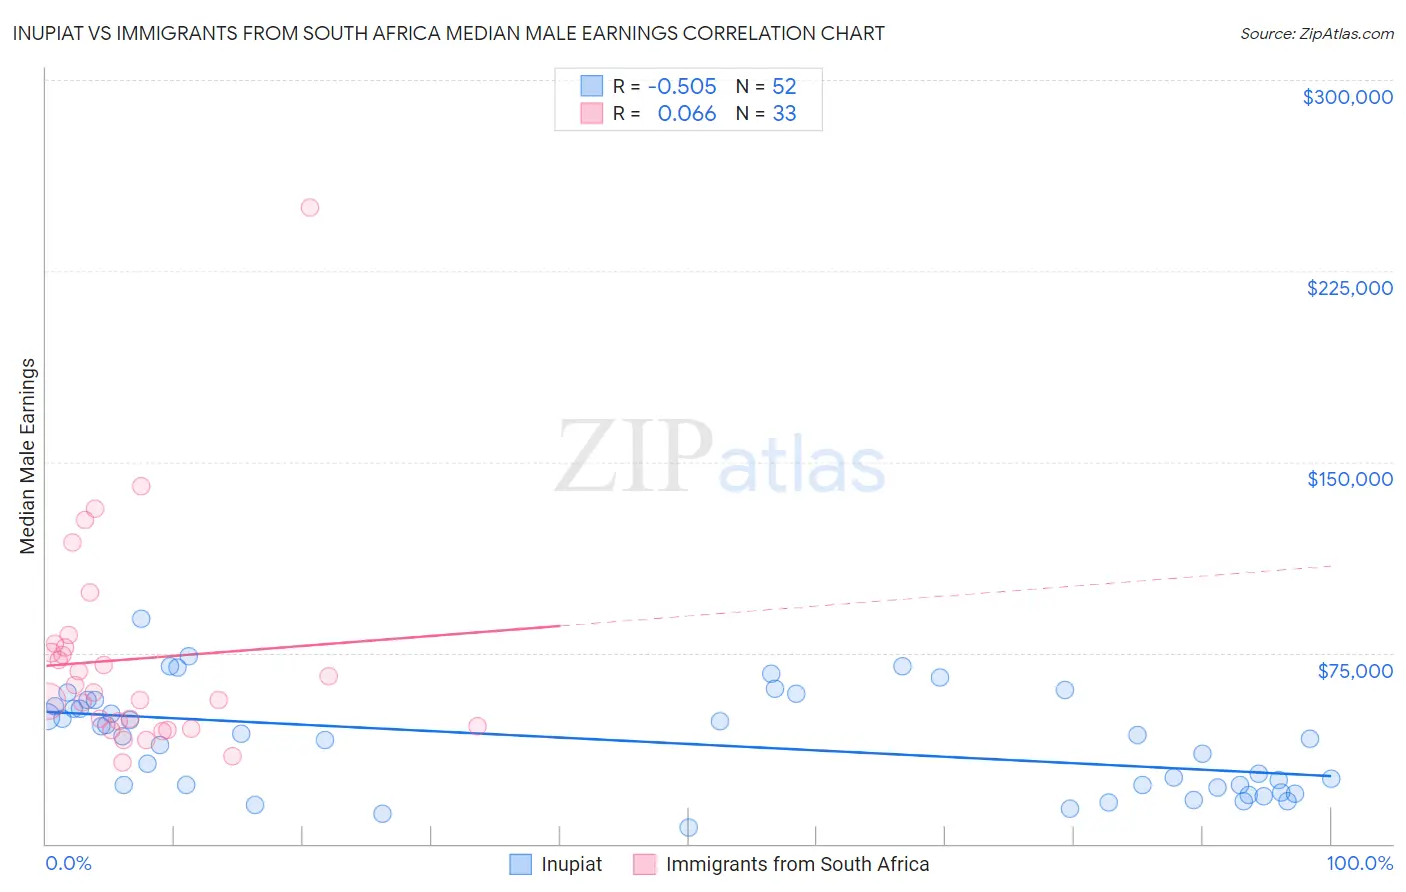 Inupiat vs Immigrants from South Africa Median Male Earnings